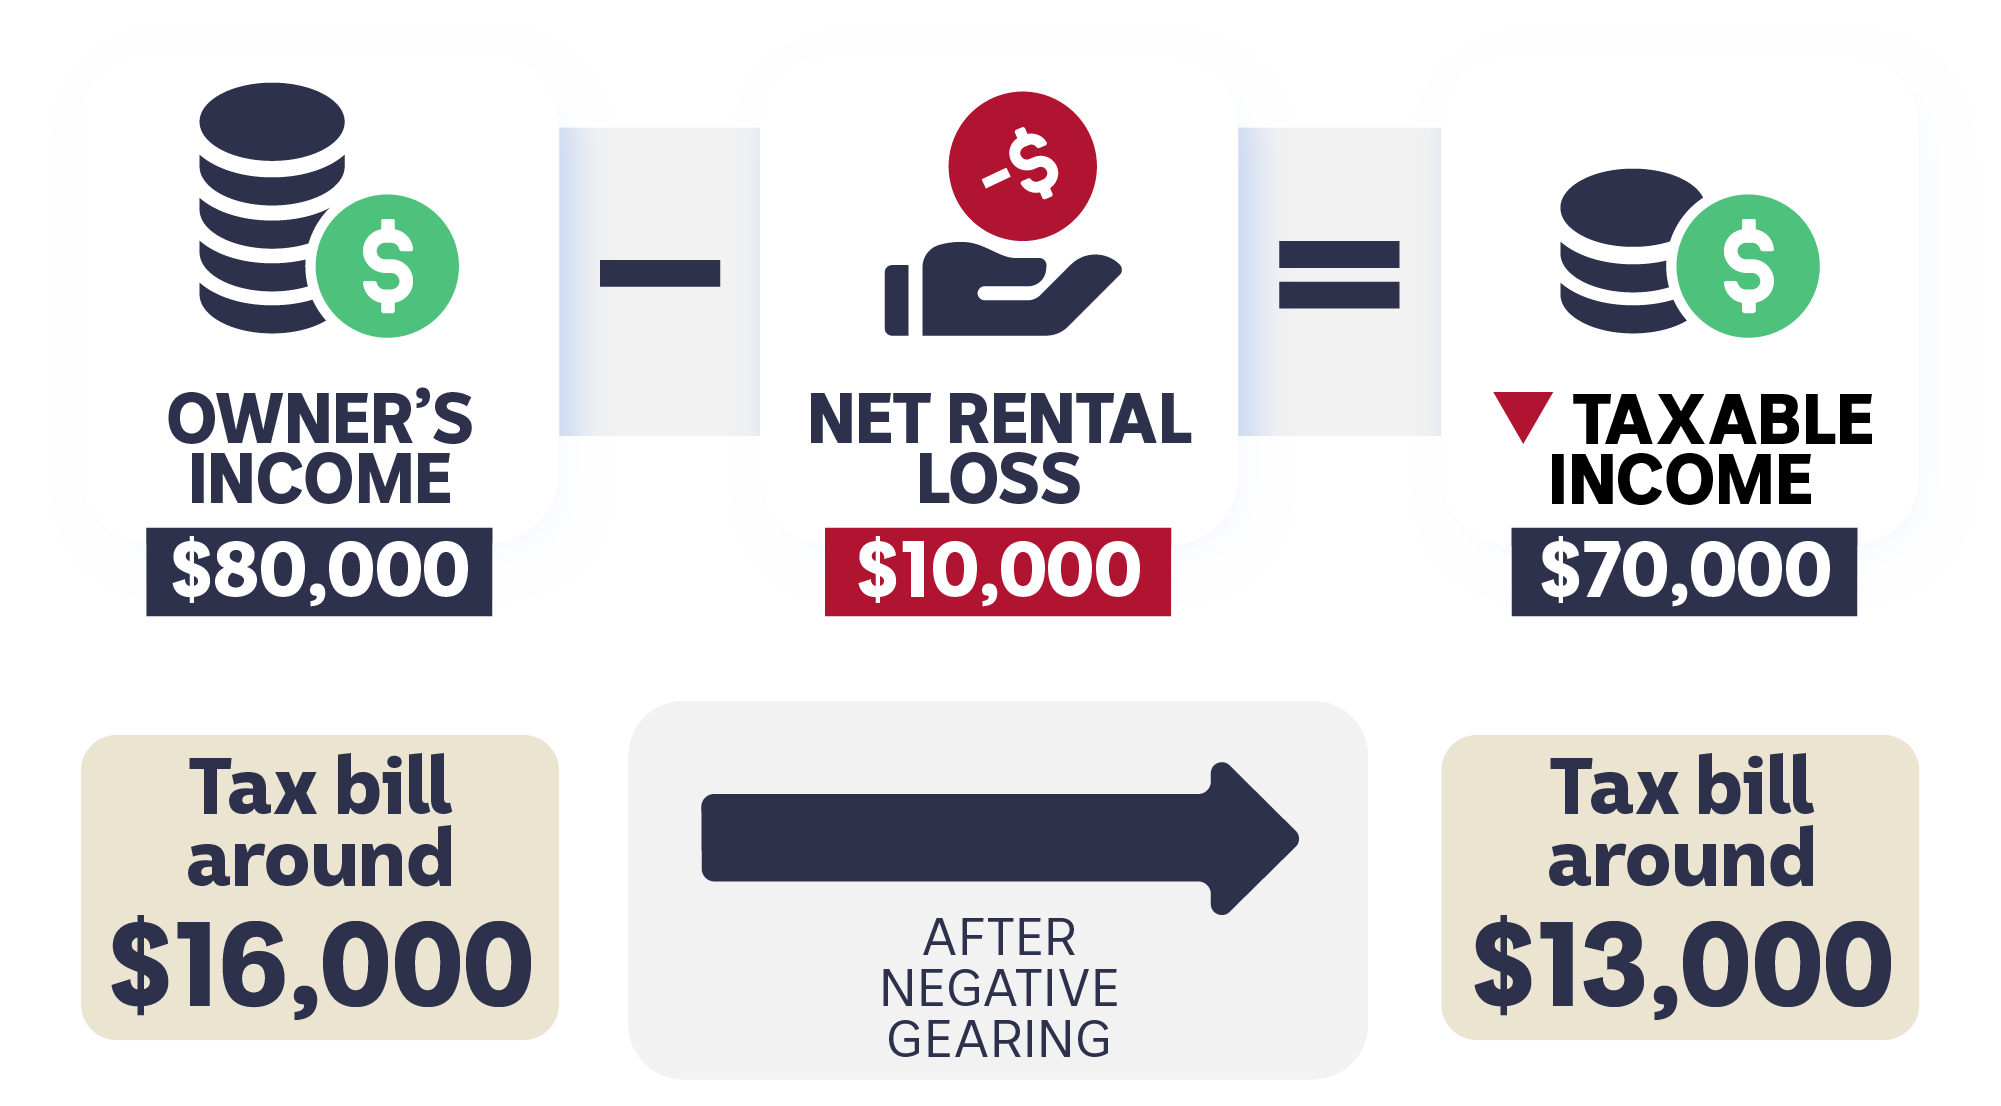 A graphic demonstrating how an investor can deduct their rental losses from their overall income to pay less tax